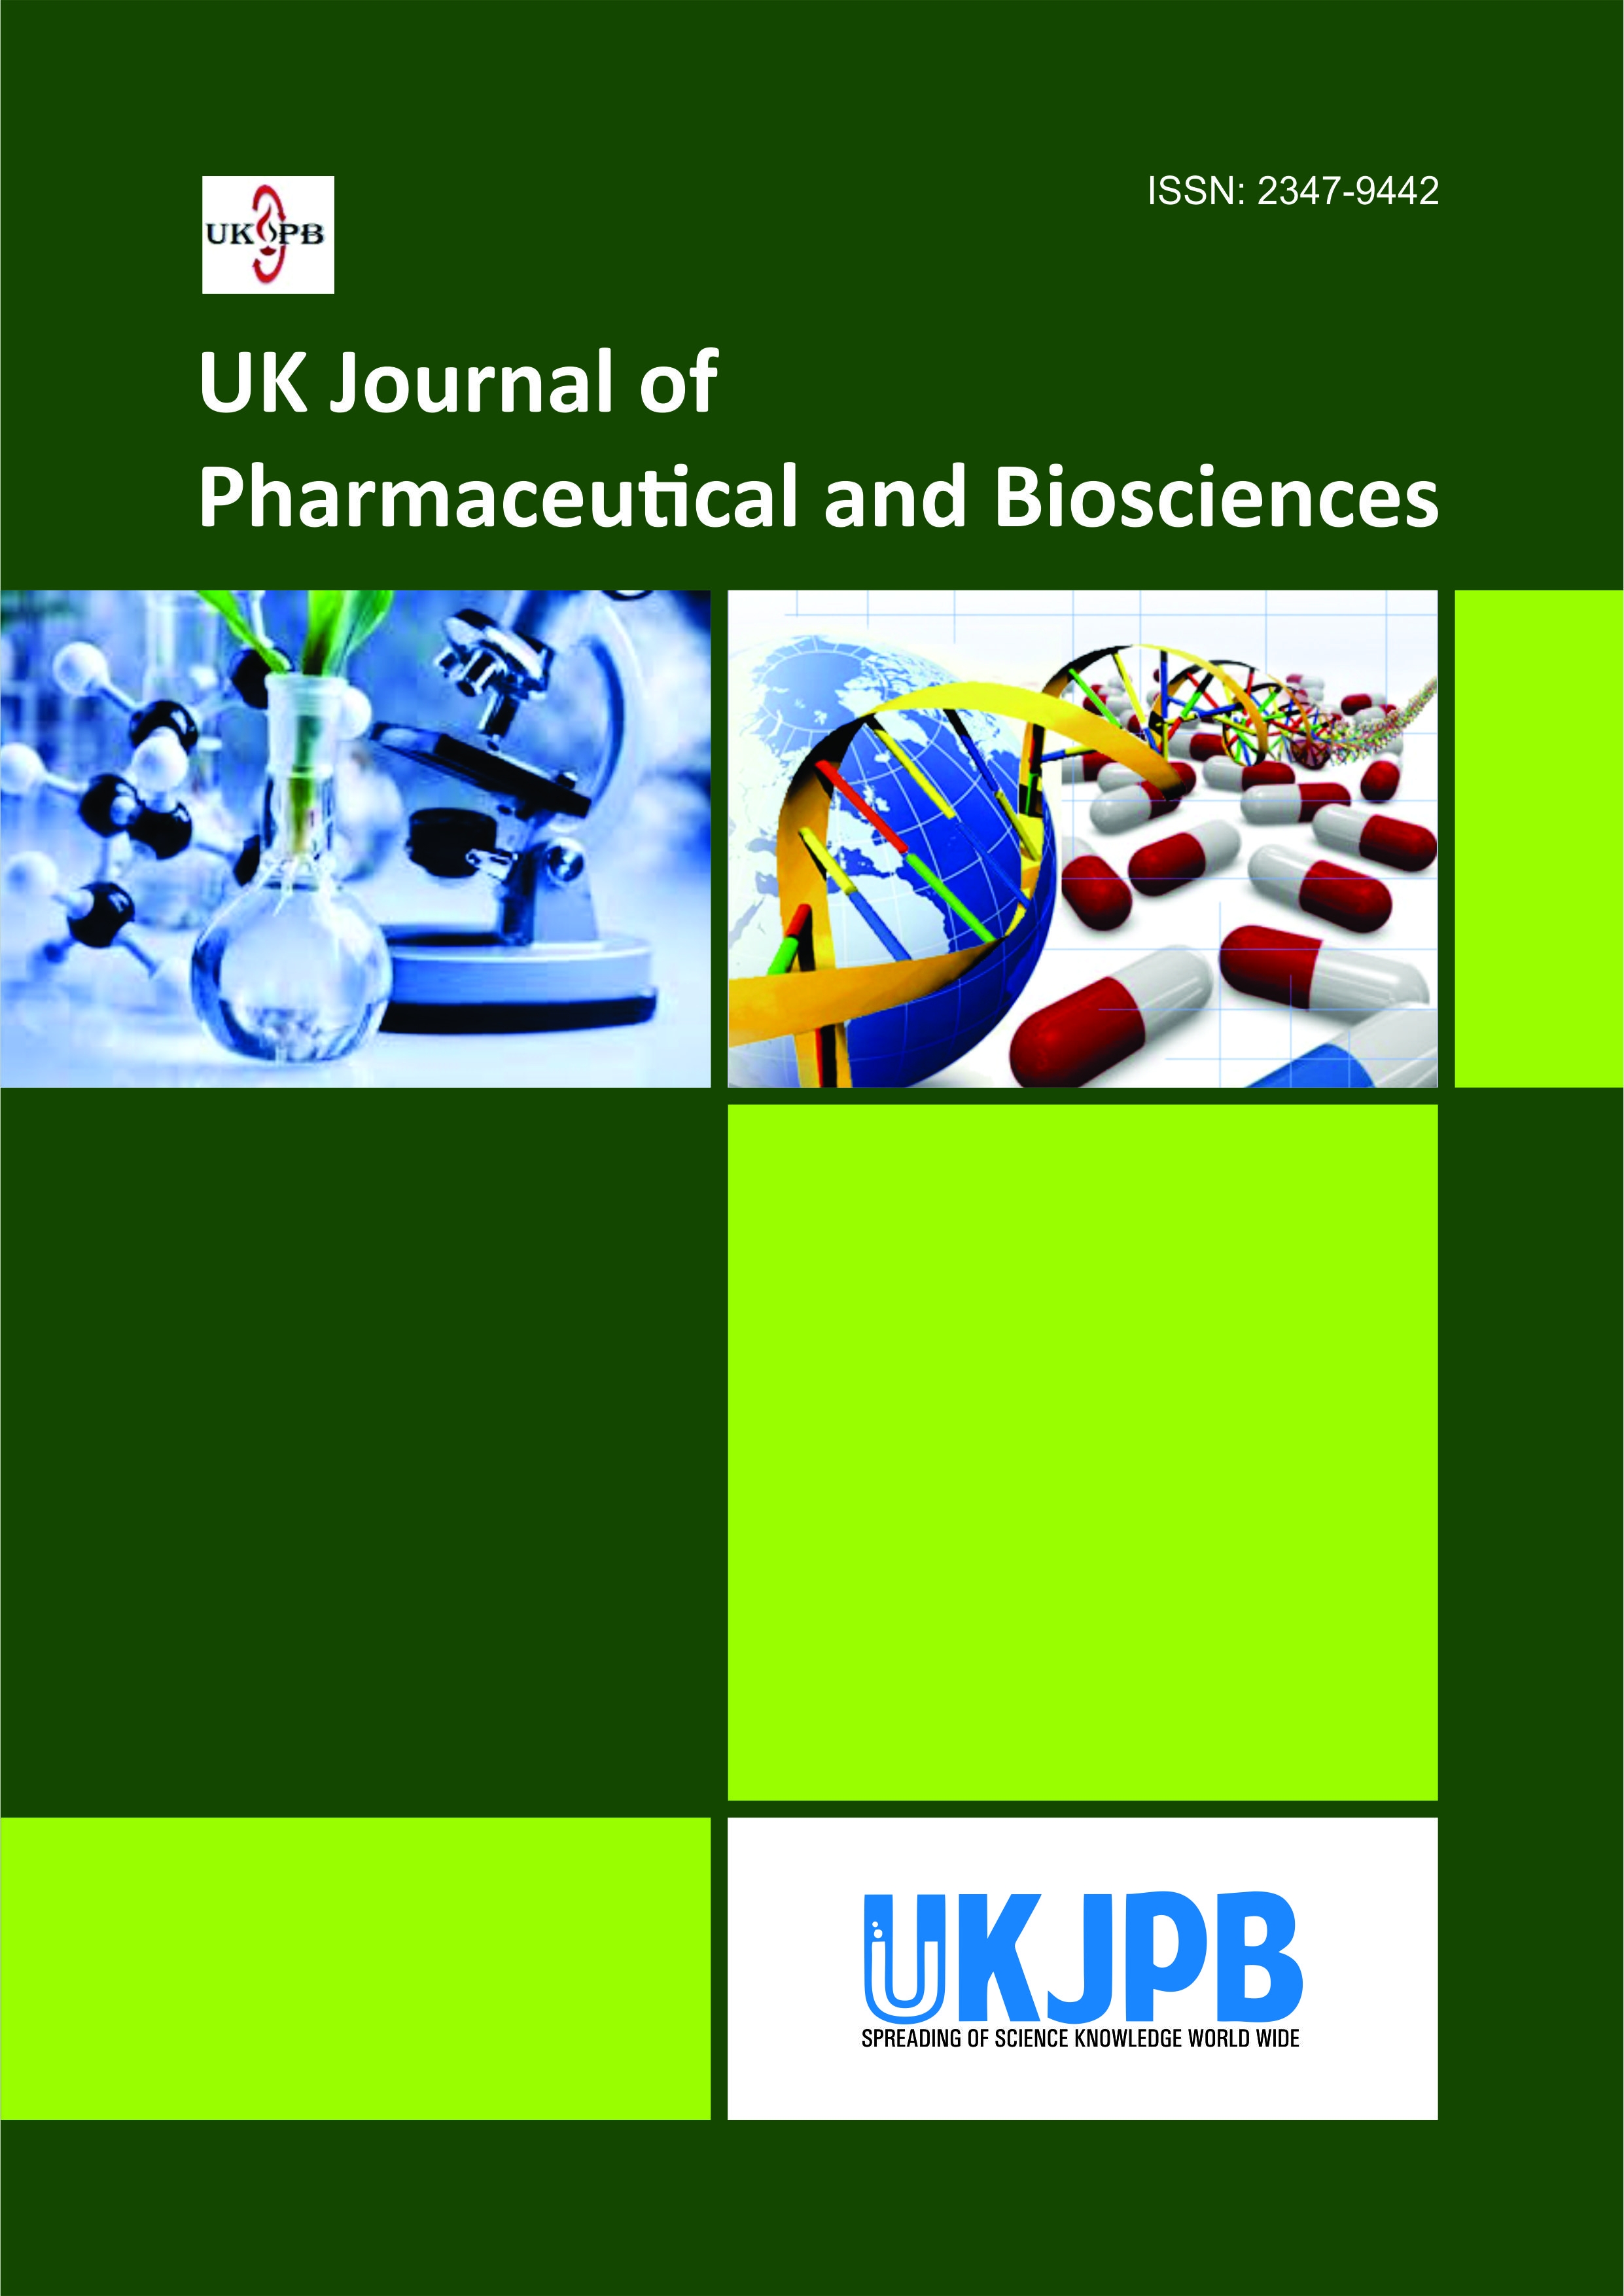 UK Journal of Pharmaceutical and Biosciences